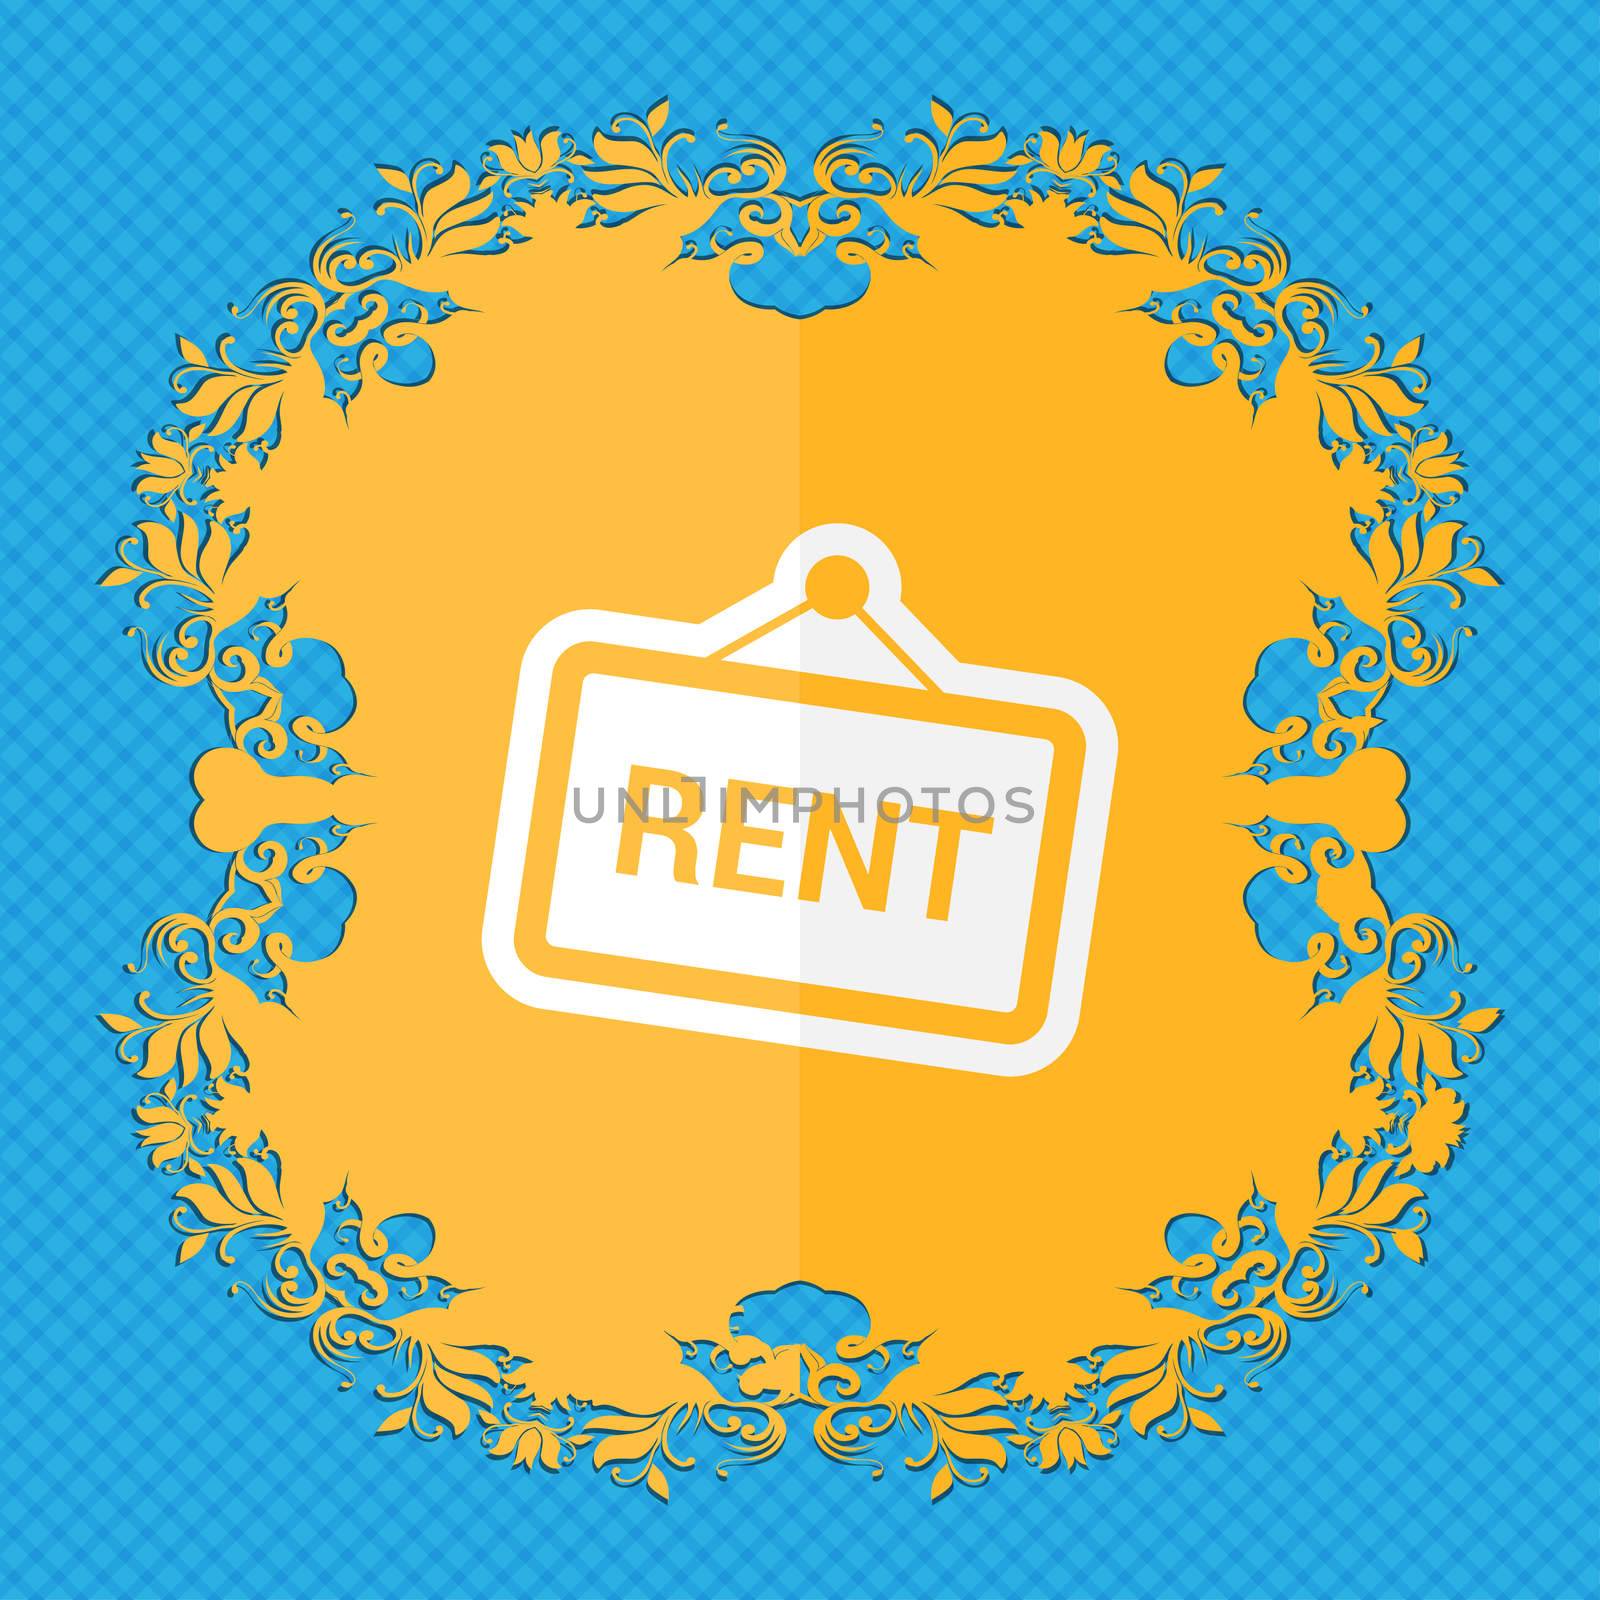 Rent. Floral flat design on a blue abstract background with place for your text.  by serhii_lohvyniuk